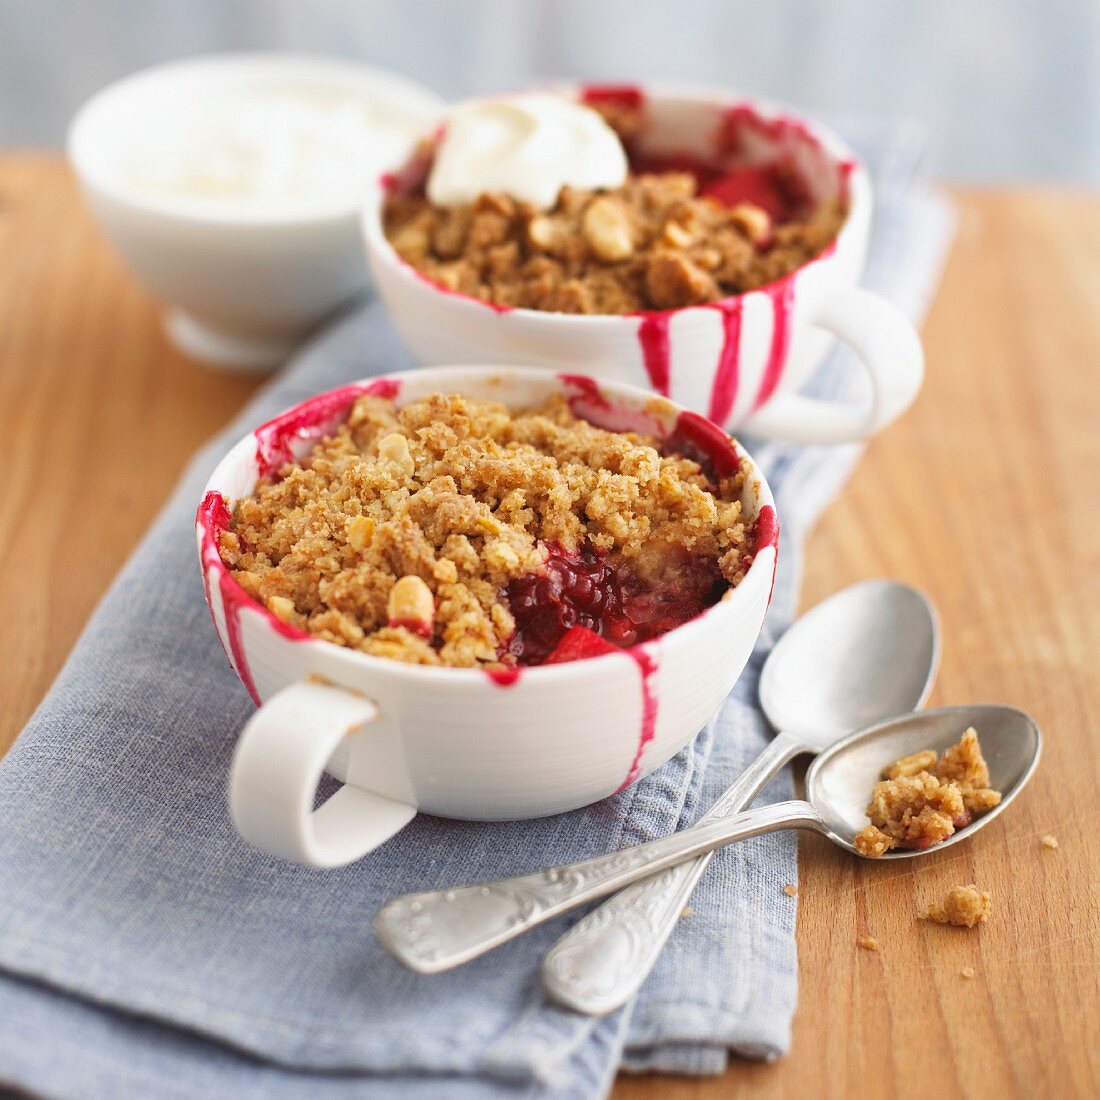 Boysenberry-apple crumbles with cream, with a bite taken out of one